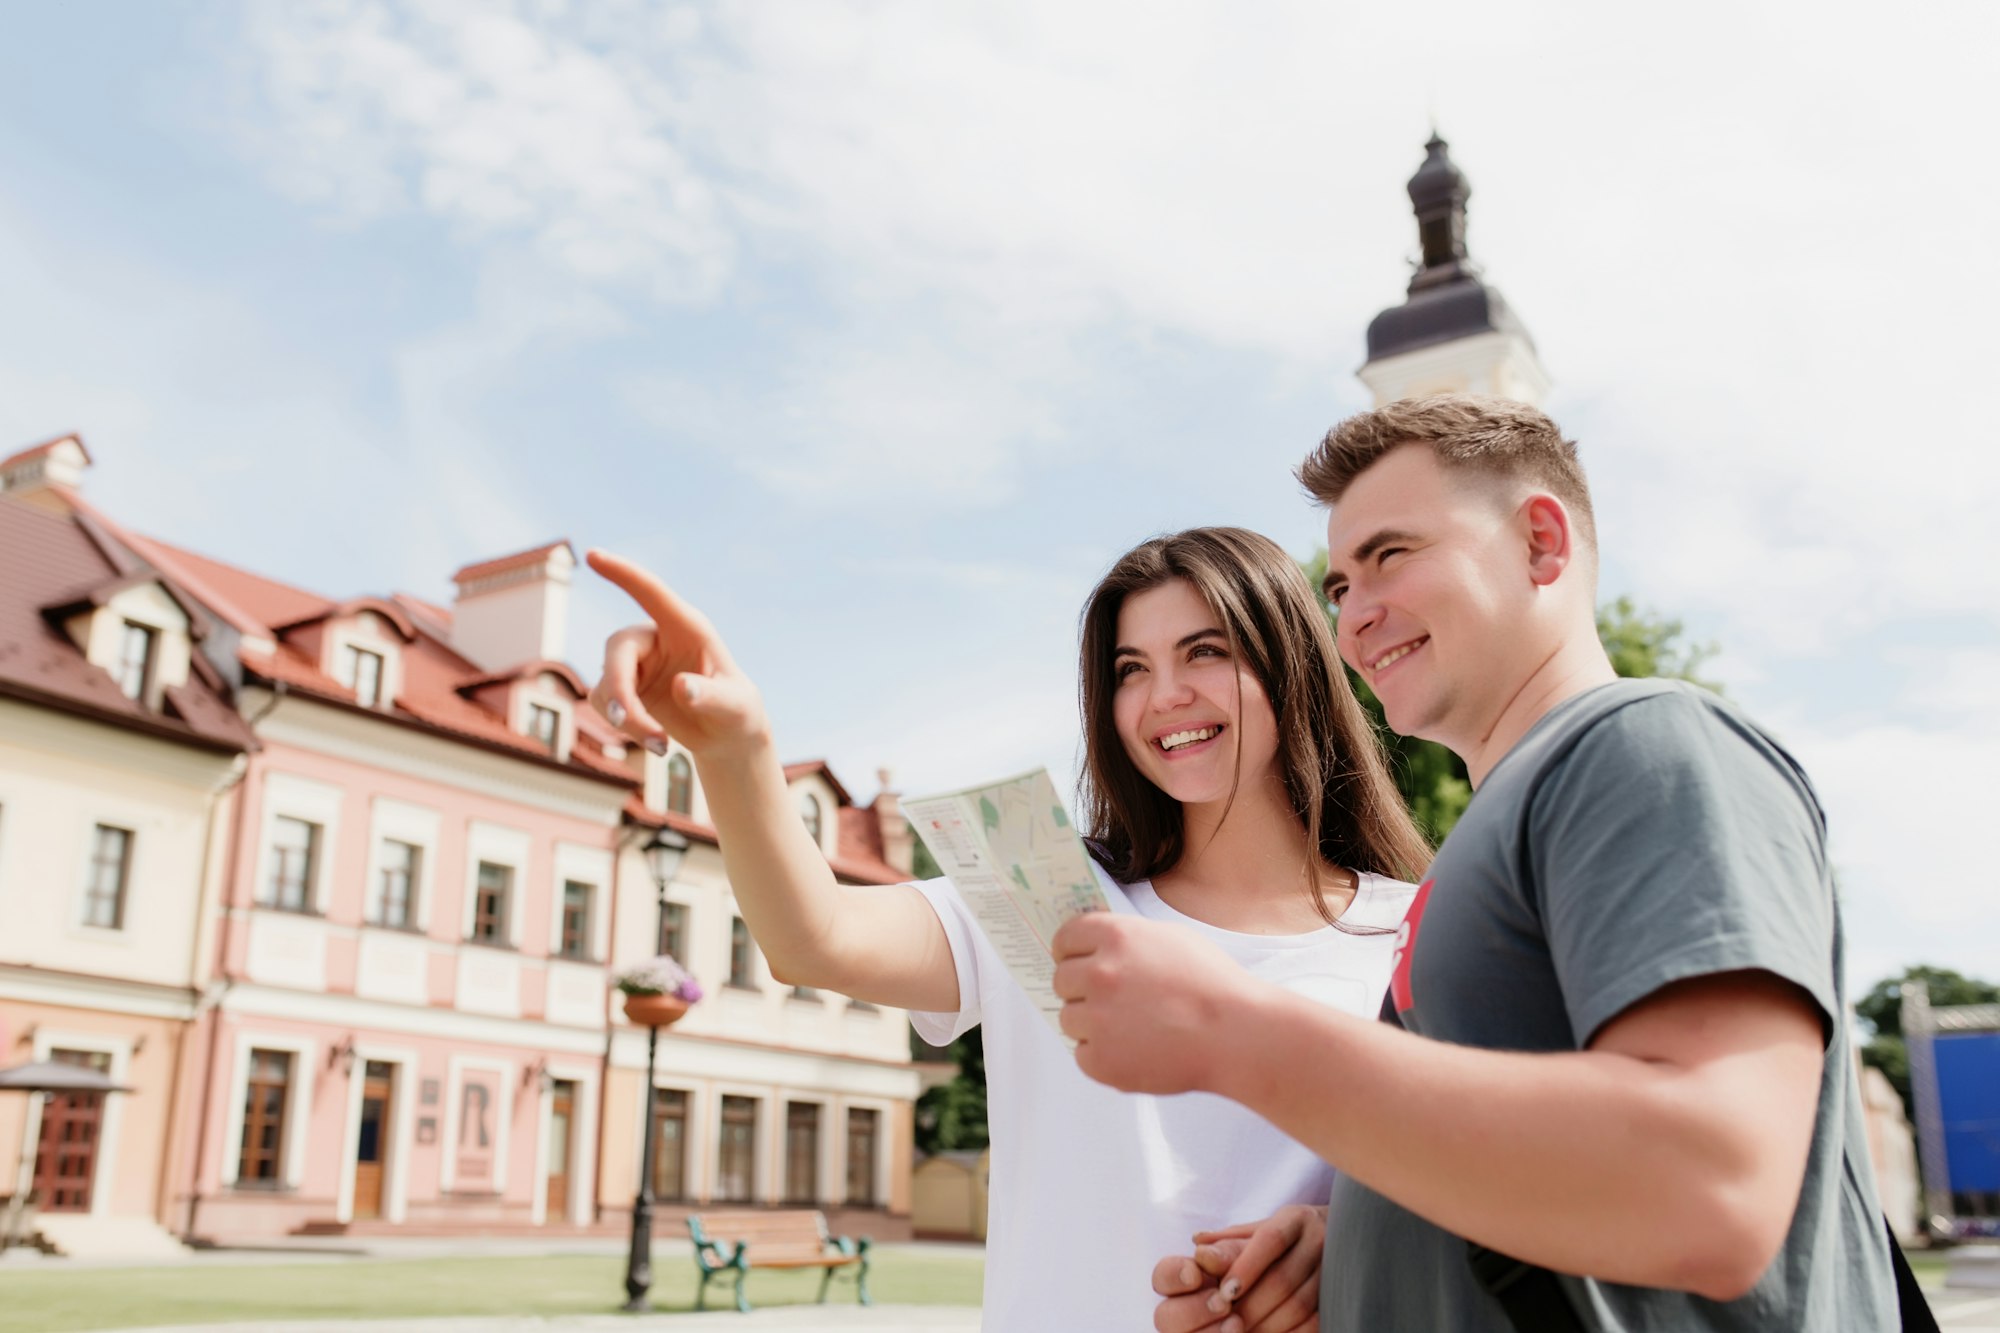 Couple of tourists in love looking at city map to understand how to find a place